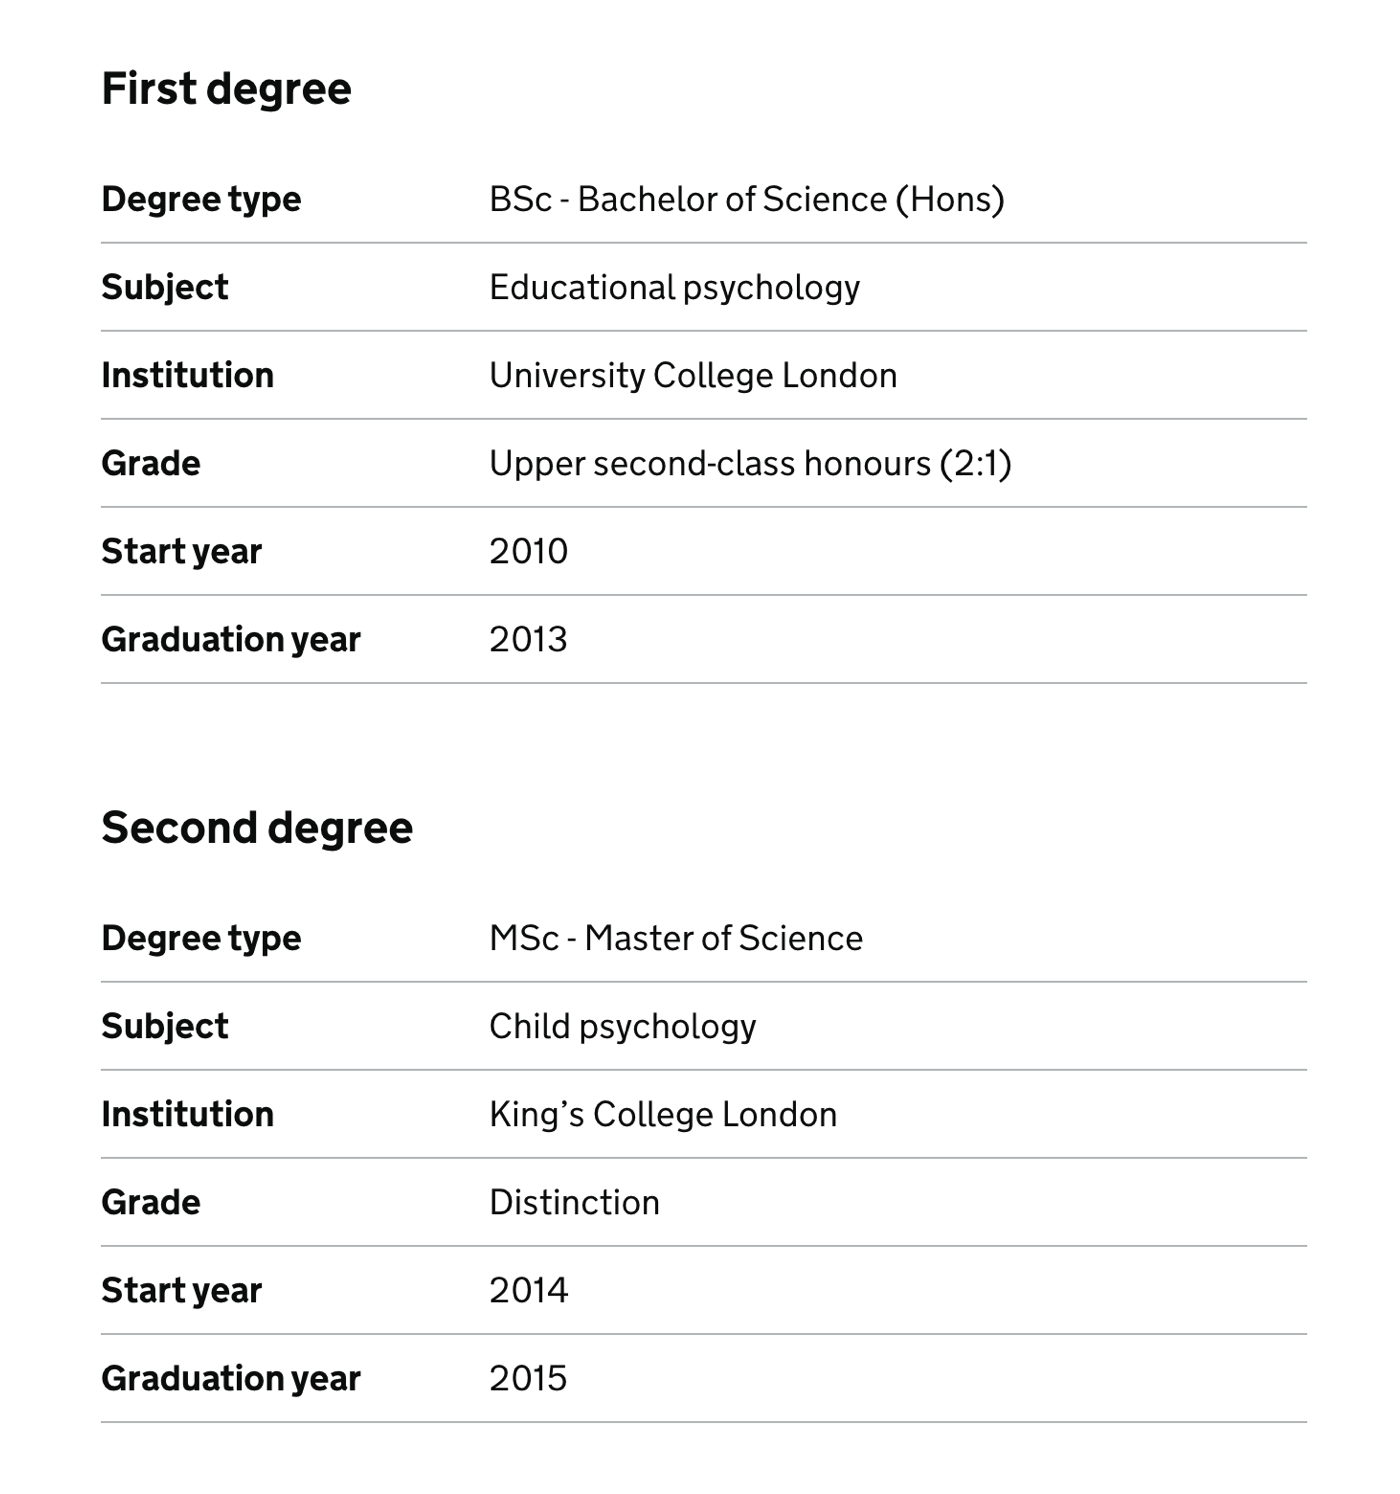 Candidate with multiple degrees